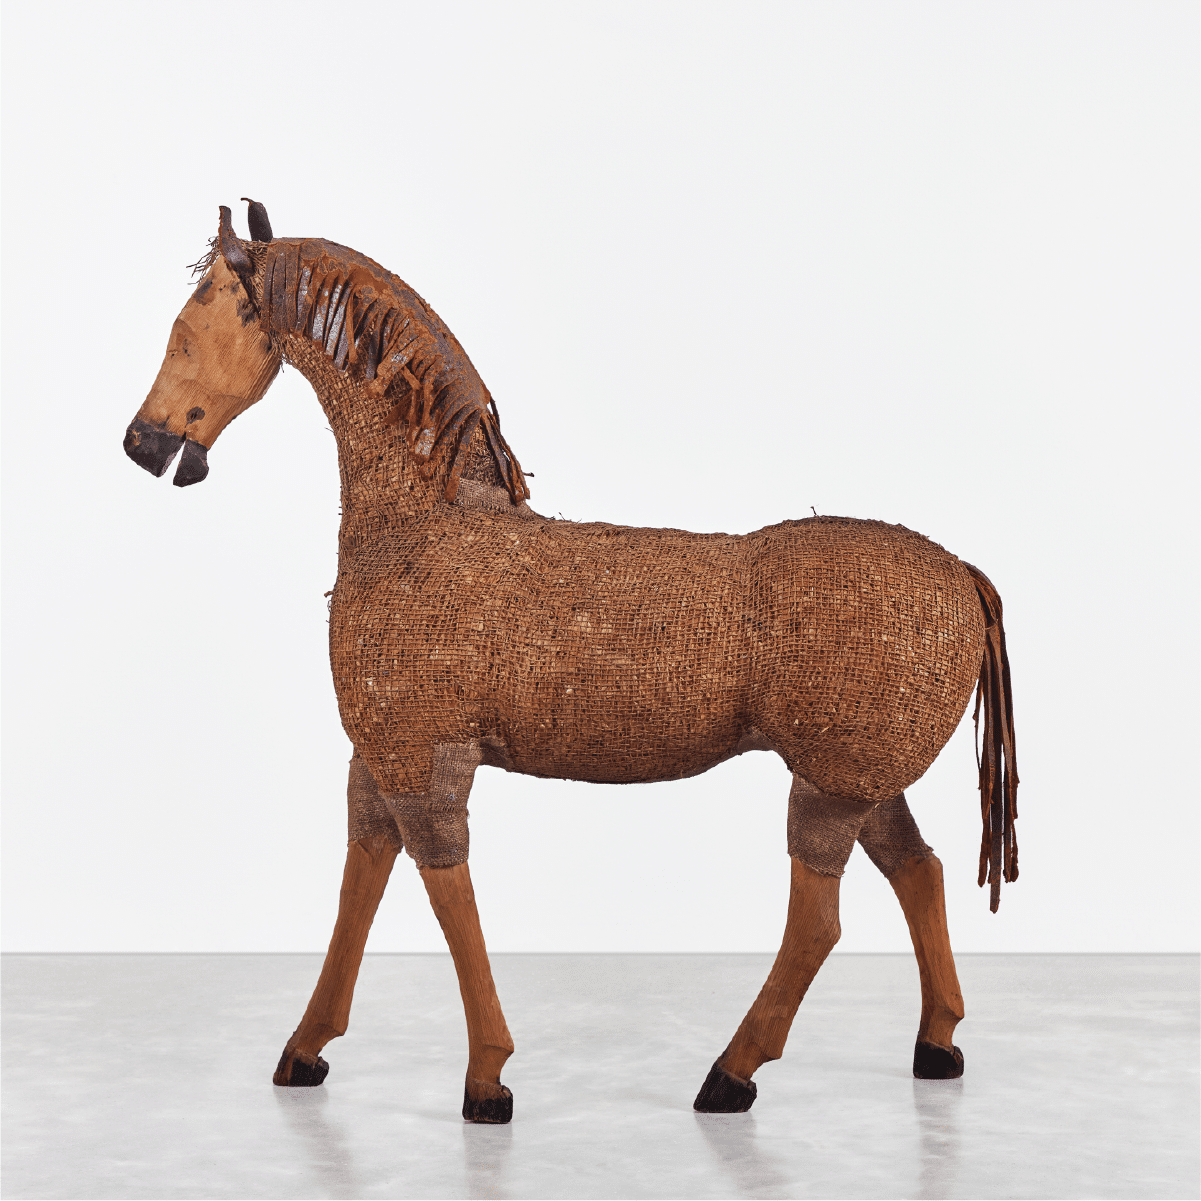 Low res for web_Wood and Raffia Toy Horse_CoupXX